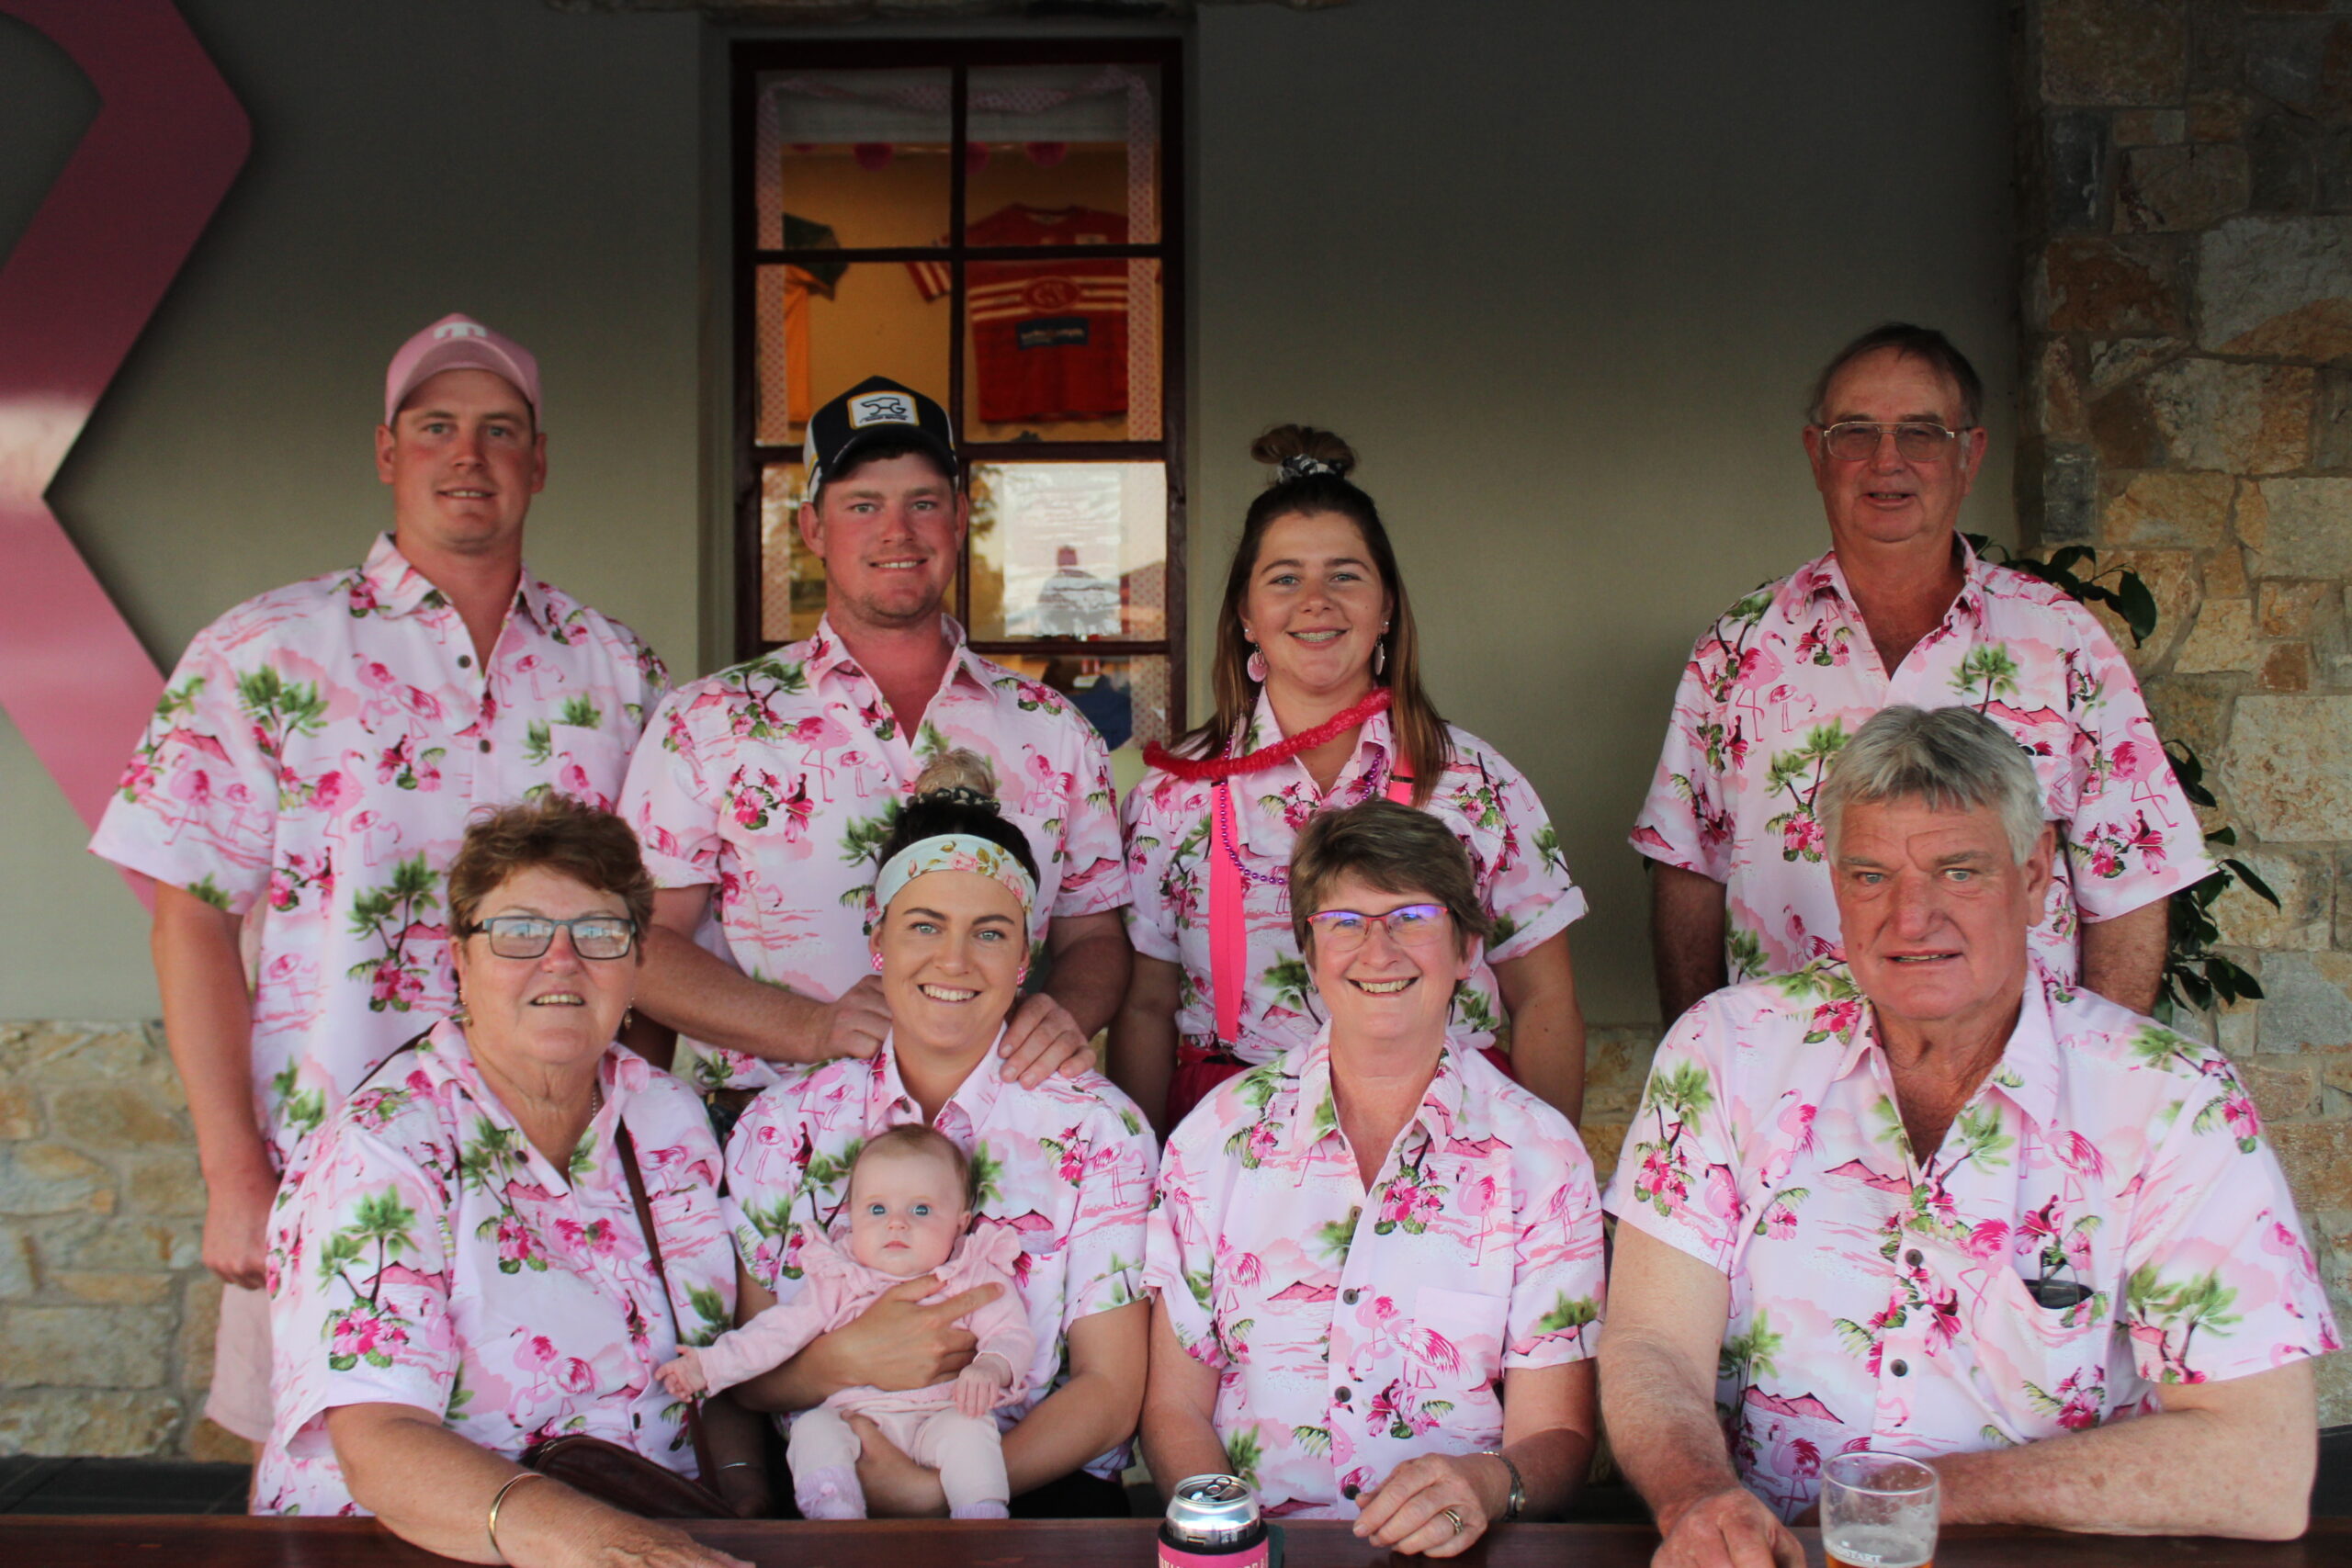 BEST DRESSED - ‘pink shirts’ team: Back, Linton Grumley, Hayden Grumley, Anna Hull, Peter Lennox, front, Tracey Lennox, Brooke Field, baby Ruby Grumley, Leonie and Allan Grumley. More photos in a future edition.